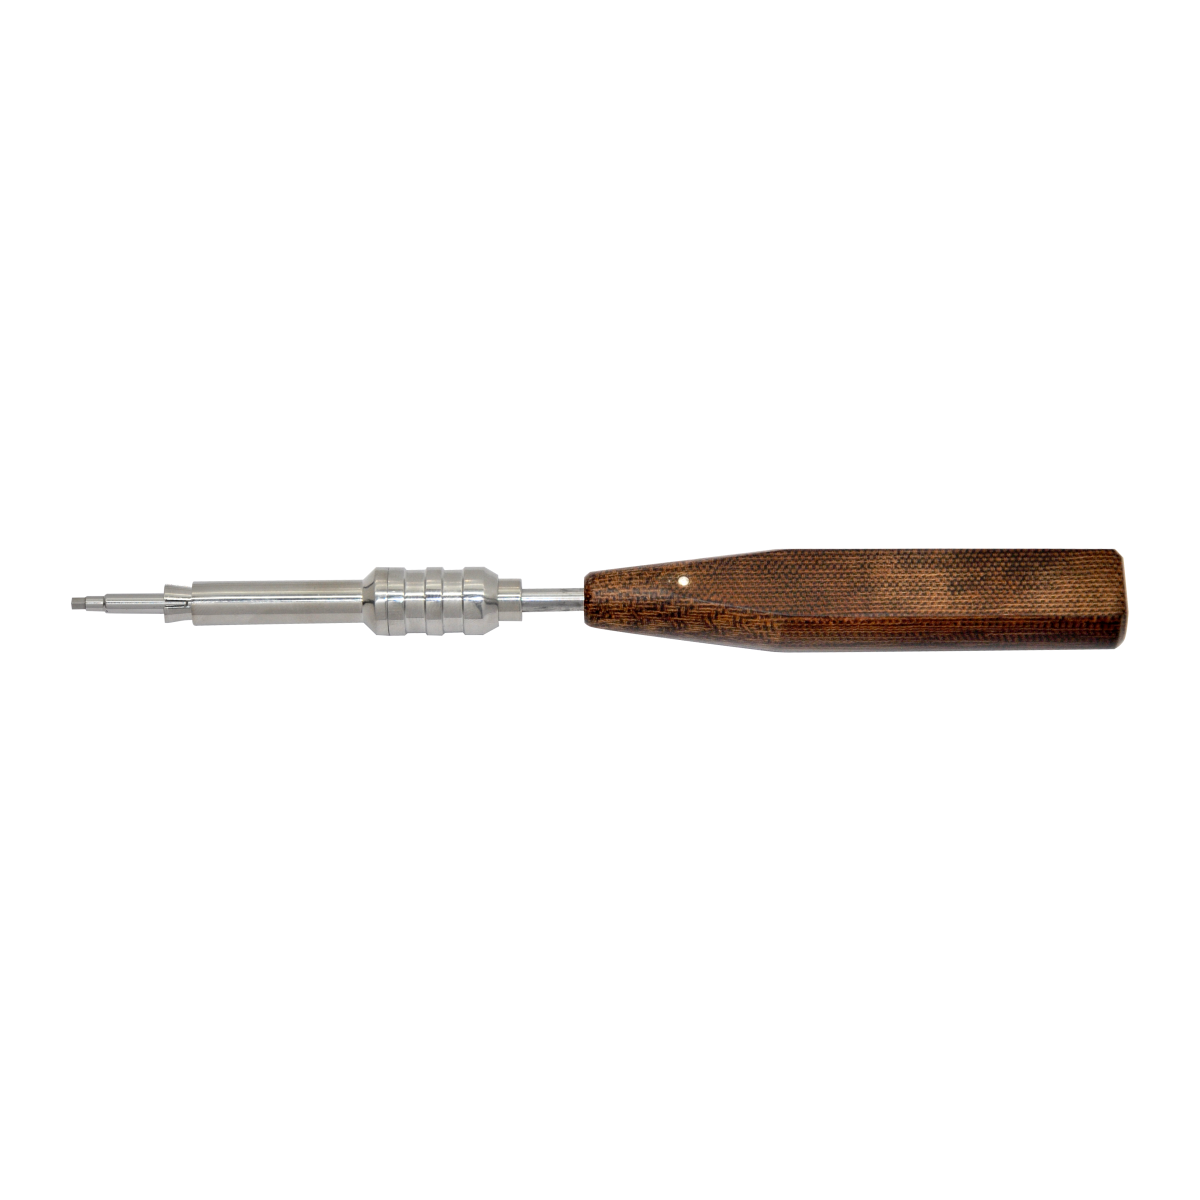 Hexagonal-Screw-Driver-with-Self-Holding-Sleeve-for-5.0mm-Locking-Head-5.0mm-Locking-Cancellous-Screws.png